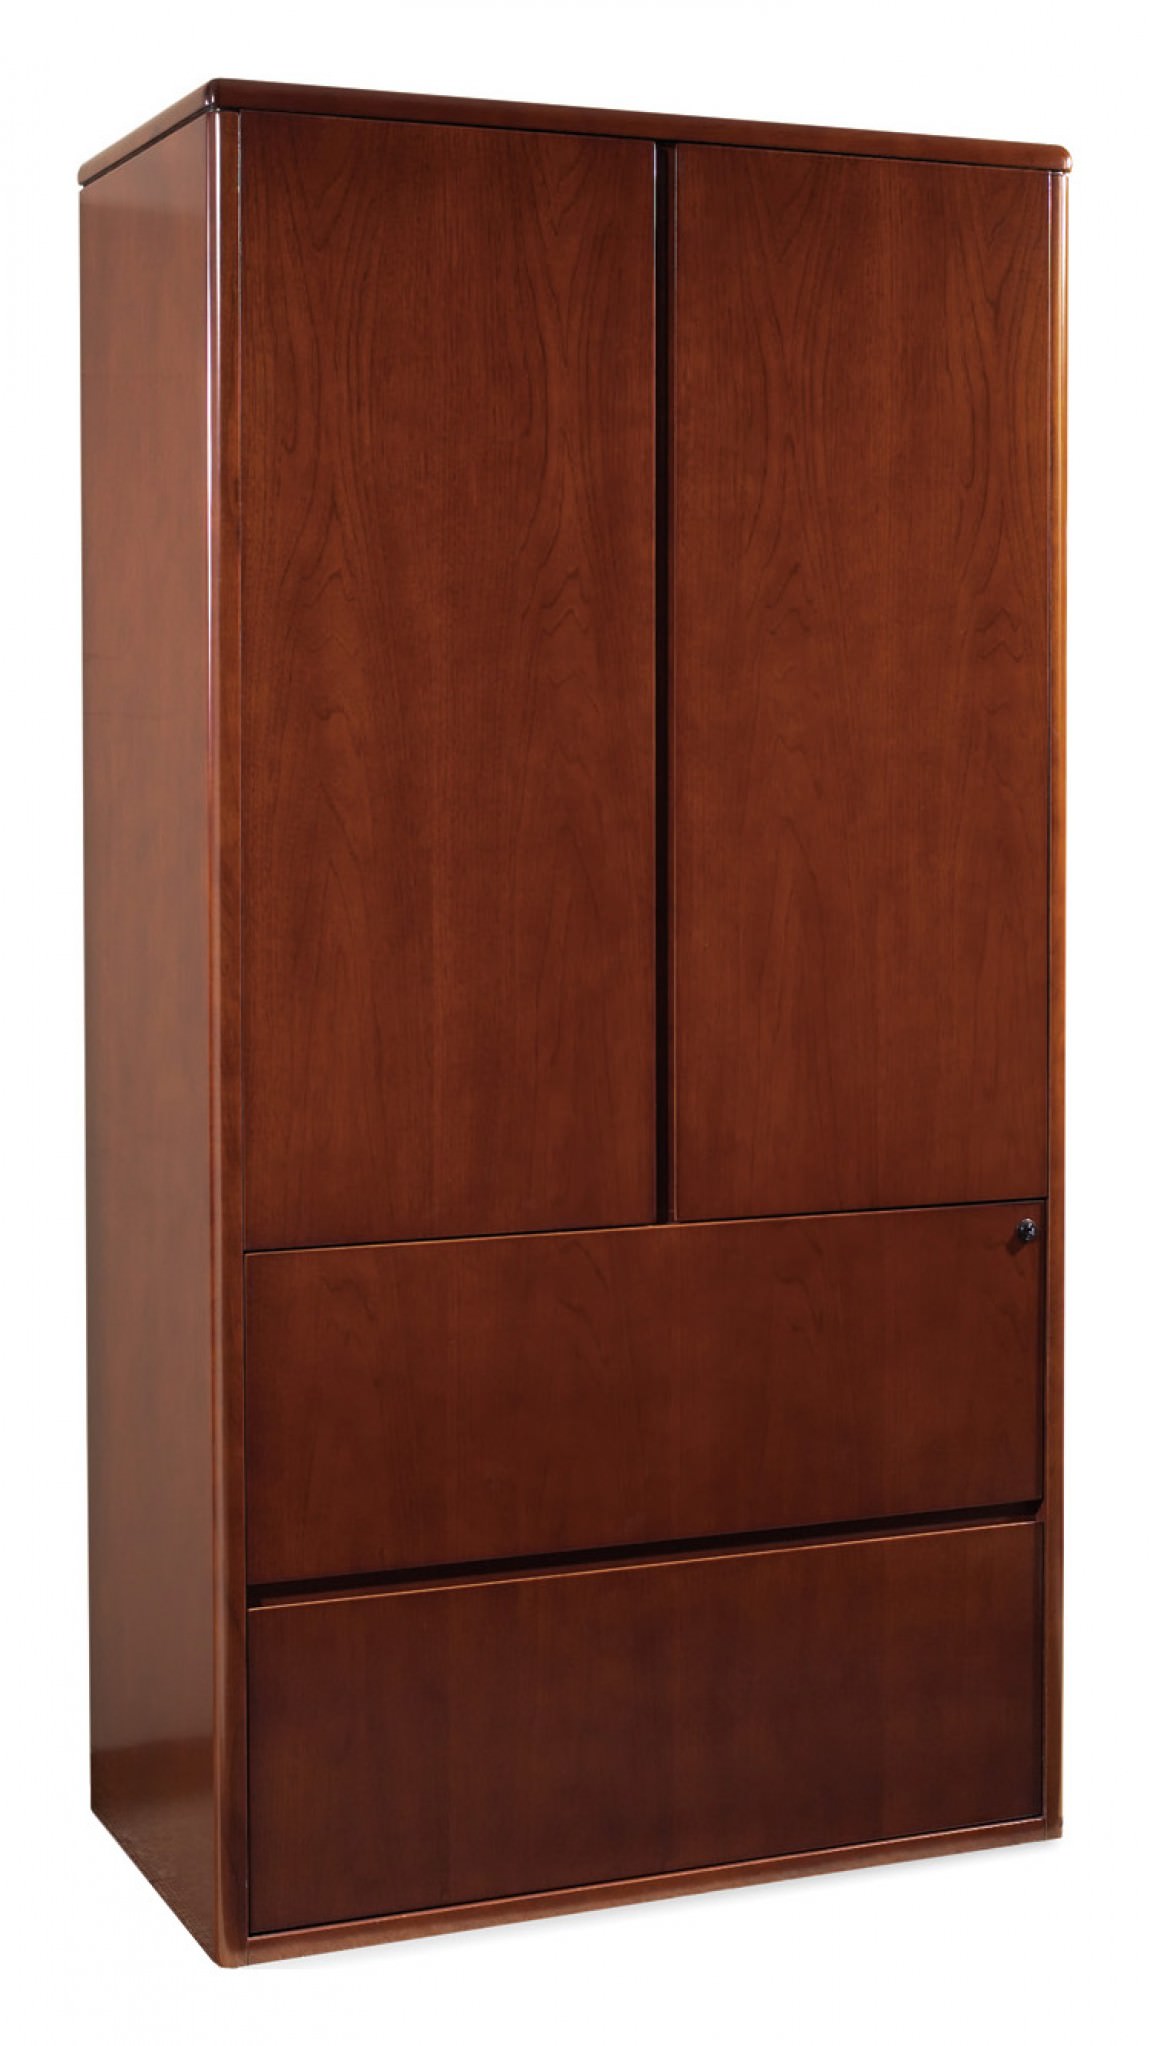 Vertical Storage Cabinet with Lateral File Drawers